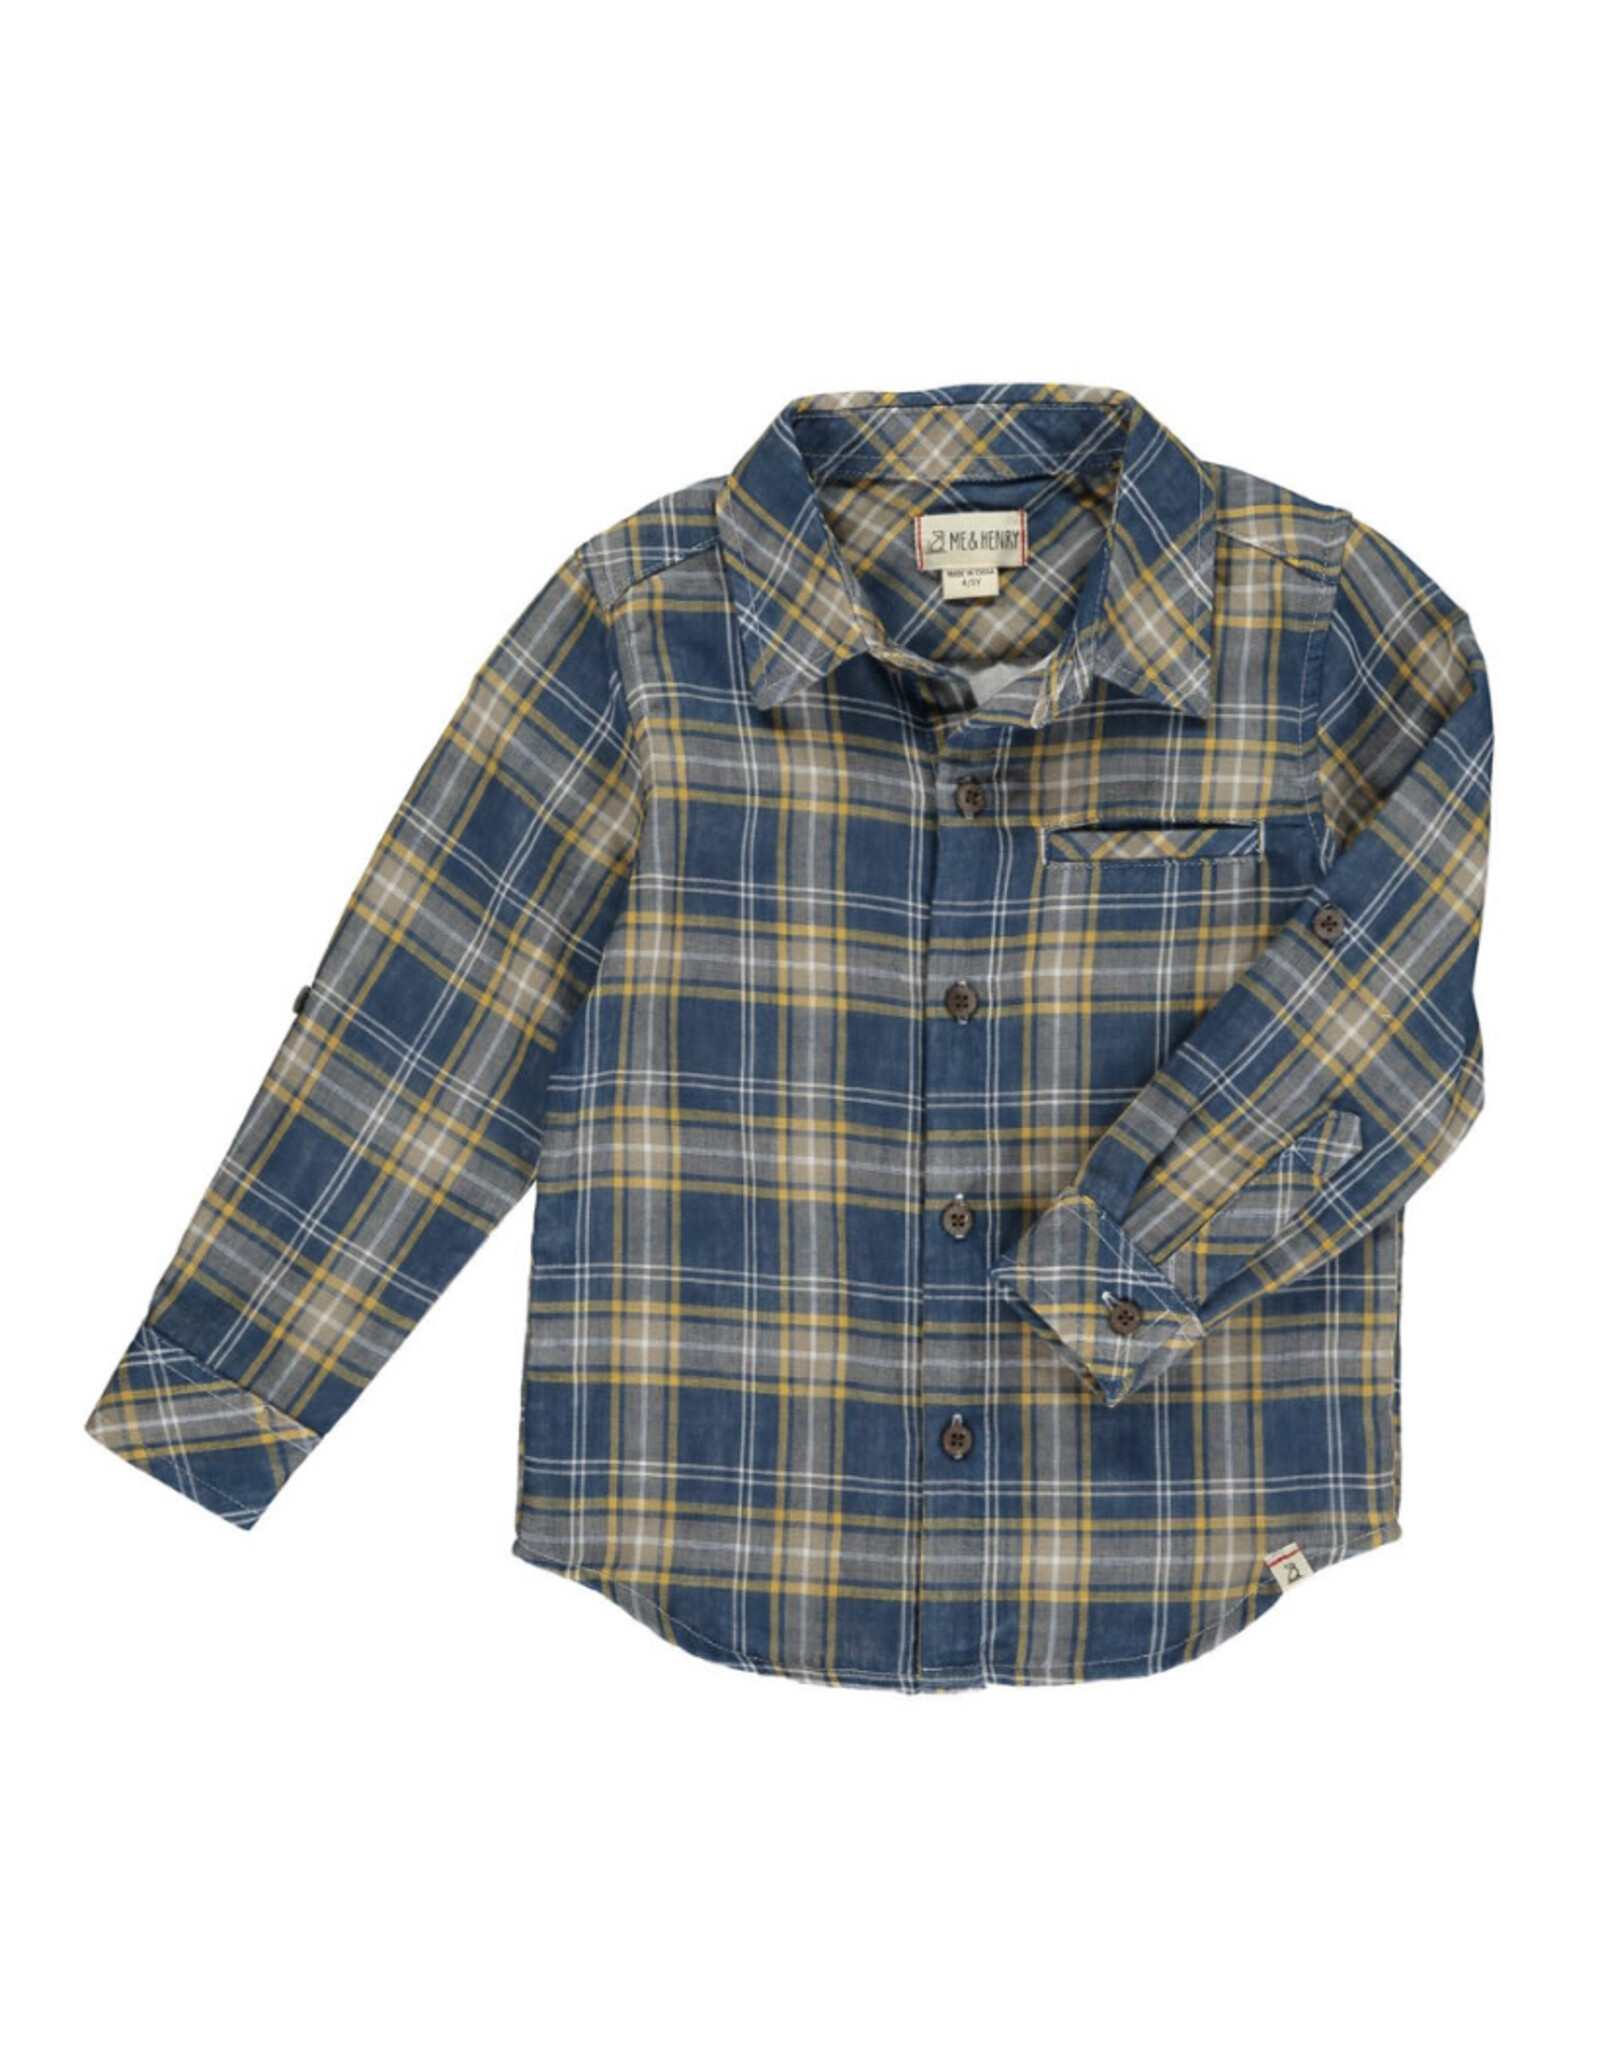 Me & Henry Me & Henry- Atwood Shirt: Blue/Gold Plaid